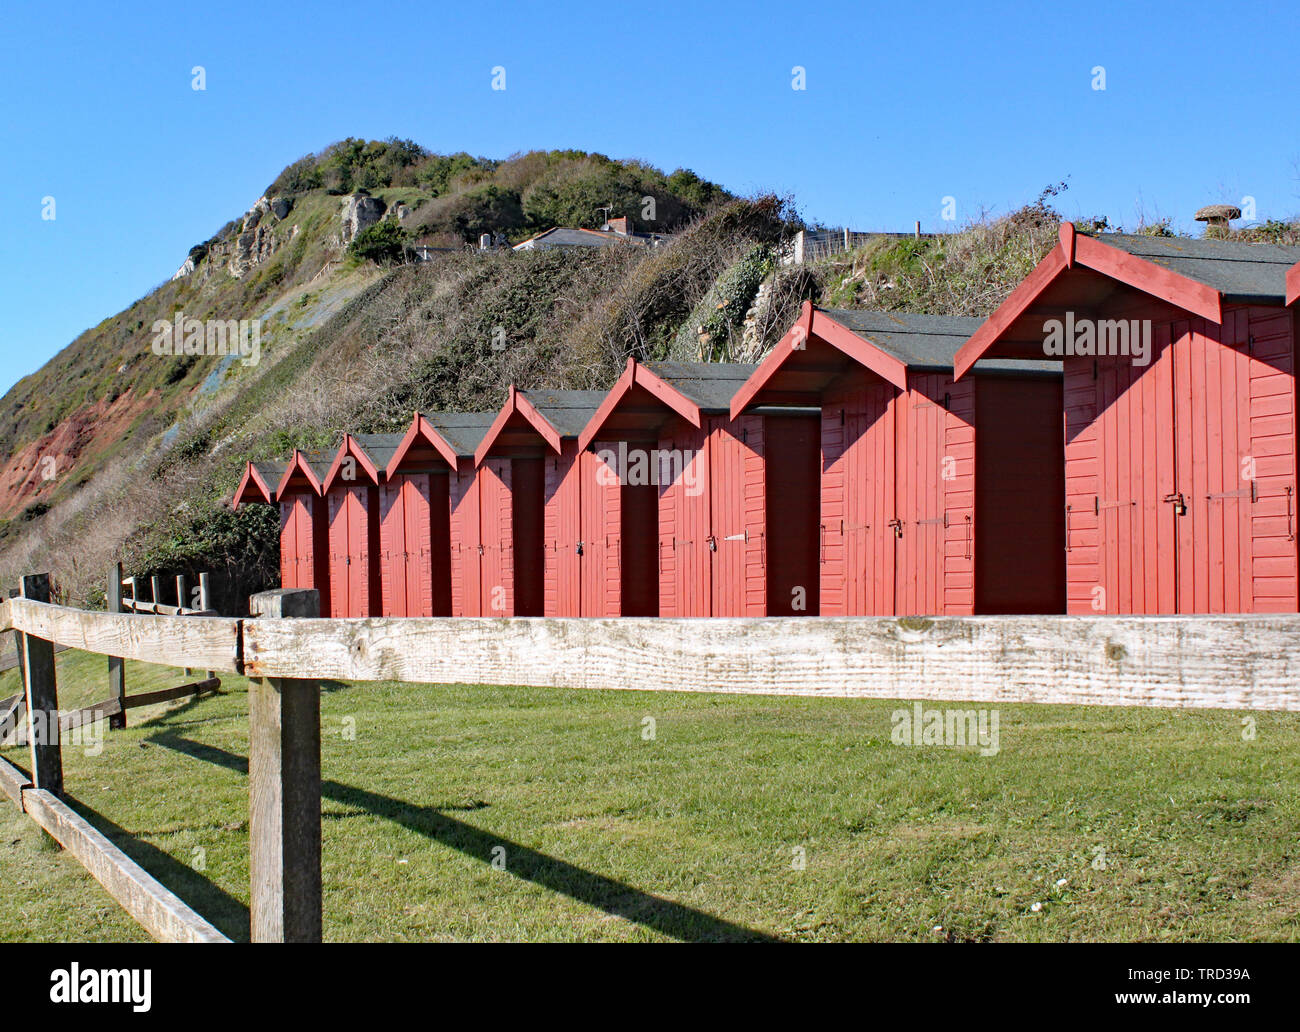 A row of beach huts on the shingle beach at Branscome in Devon, England. Stock Photo